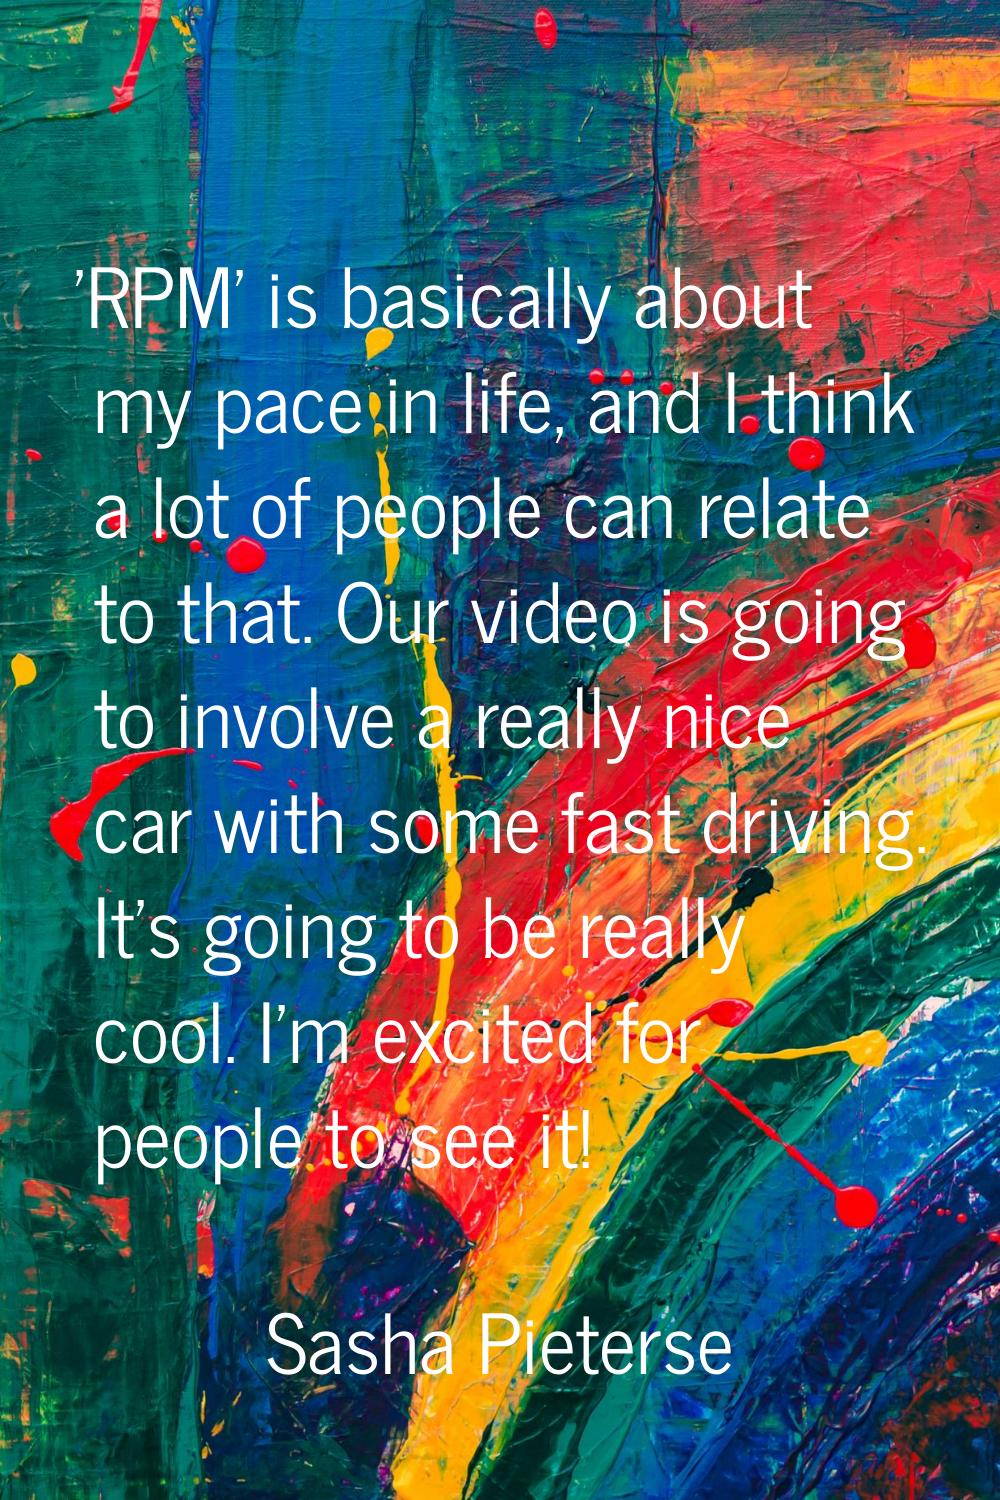 'RPM' is basically about my pace in life, and I think a lot of people can relate to that. Our video